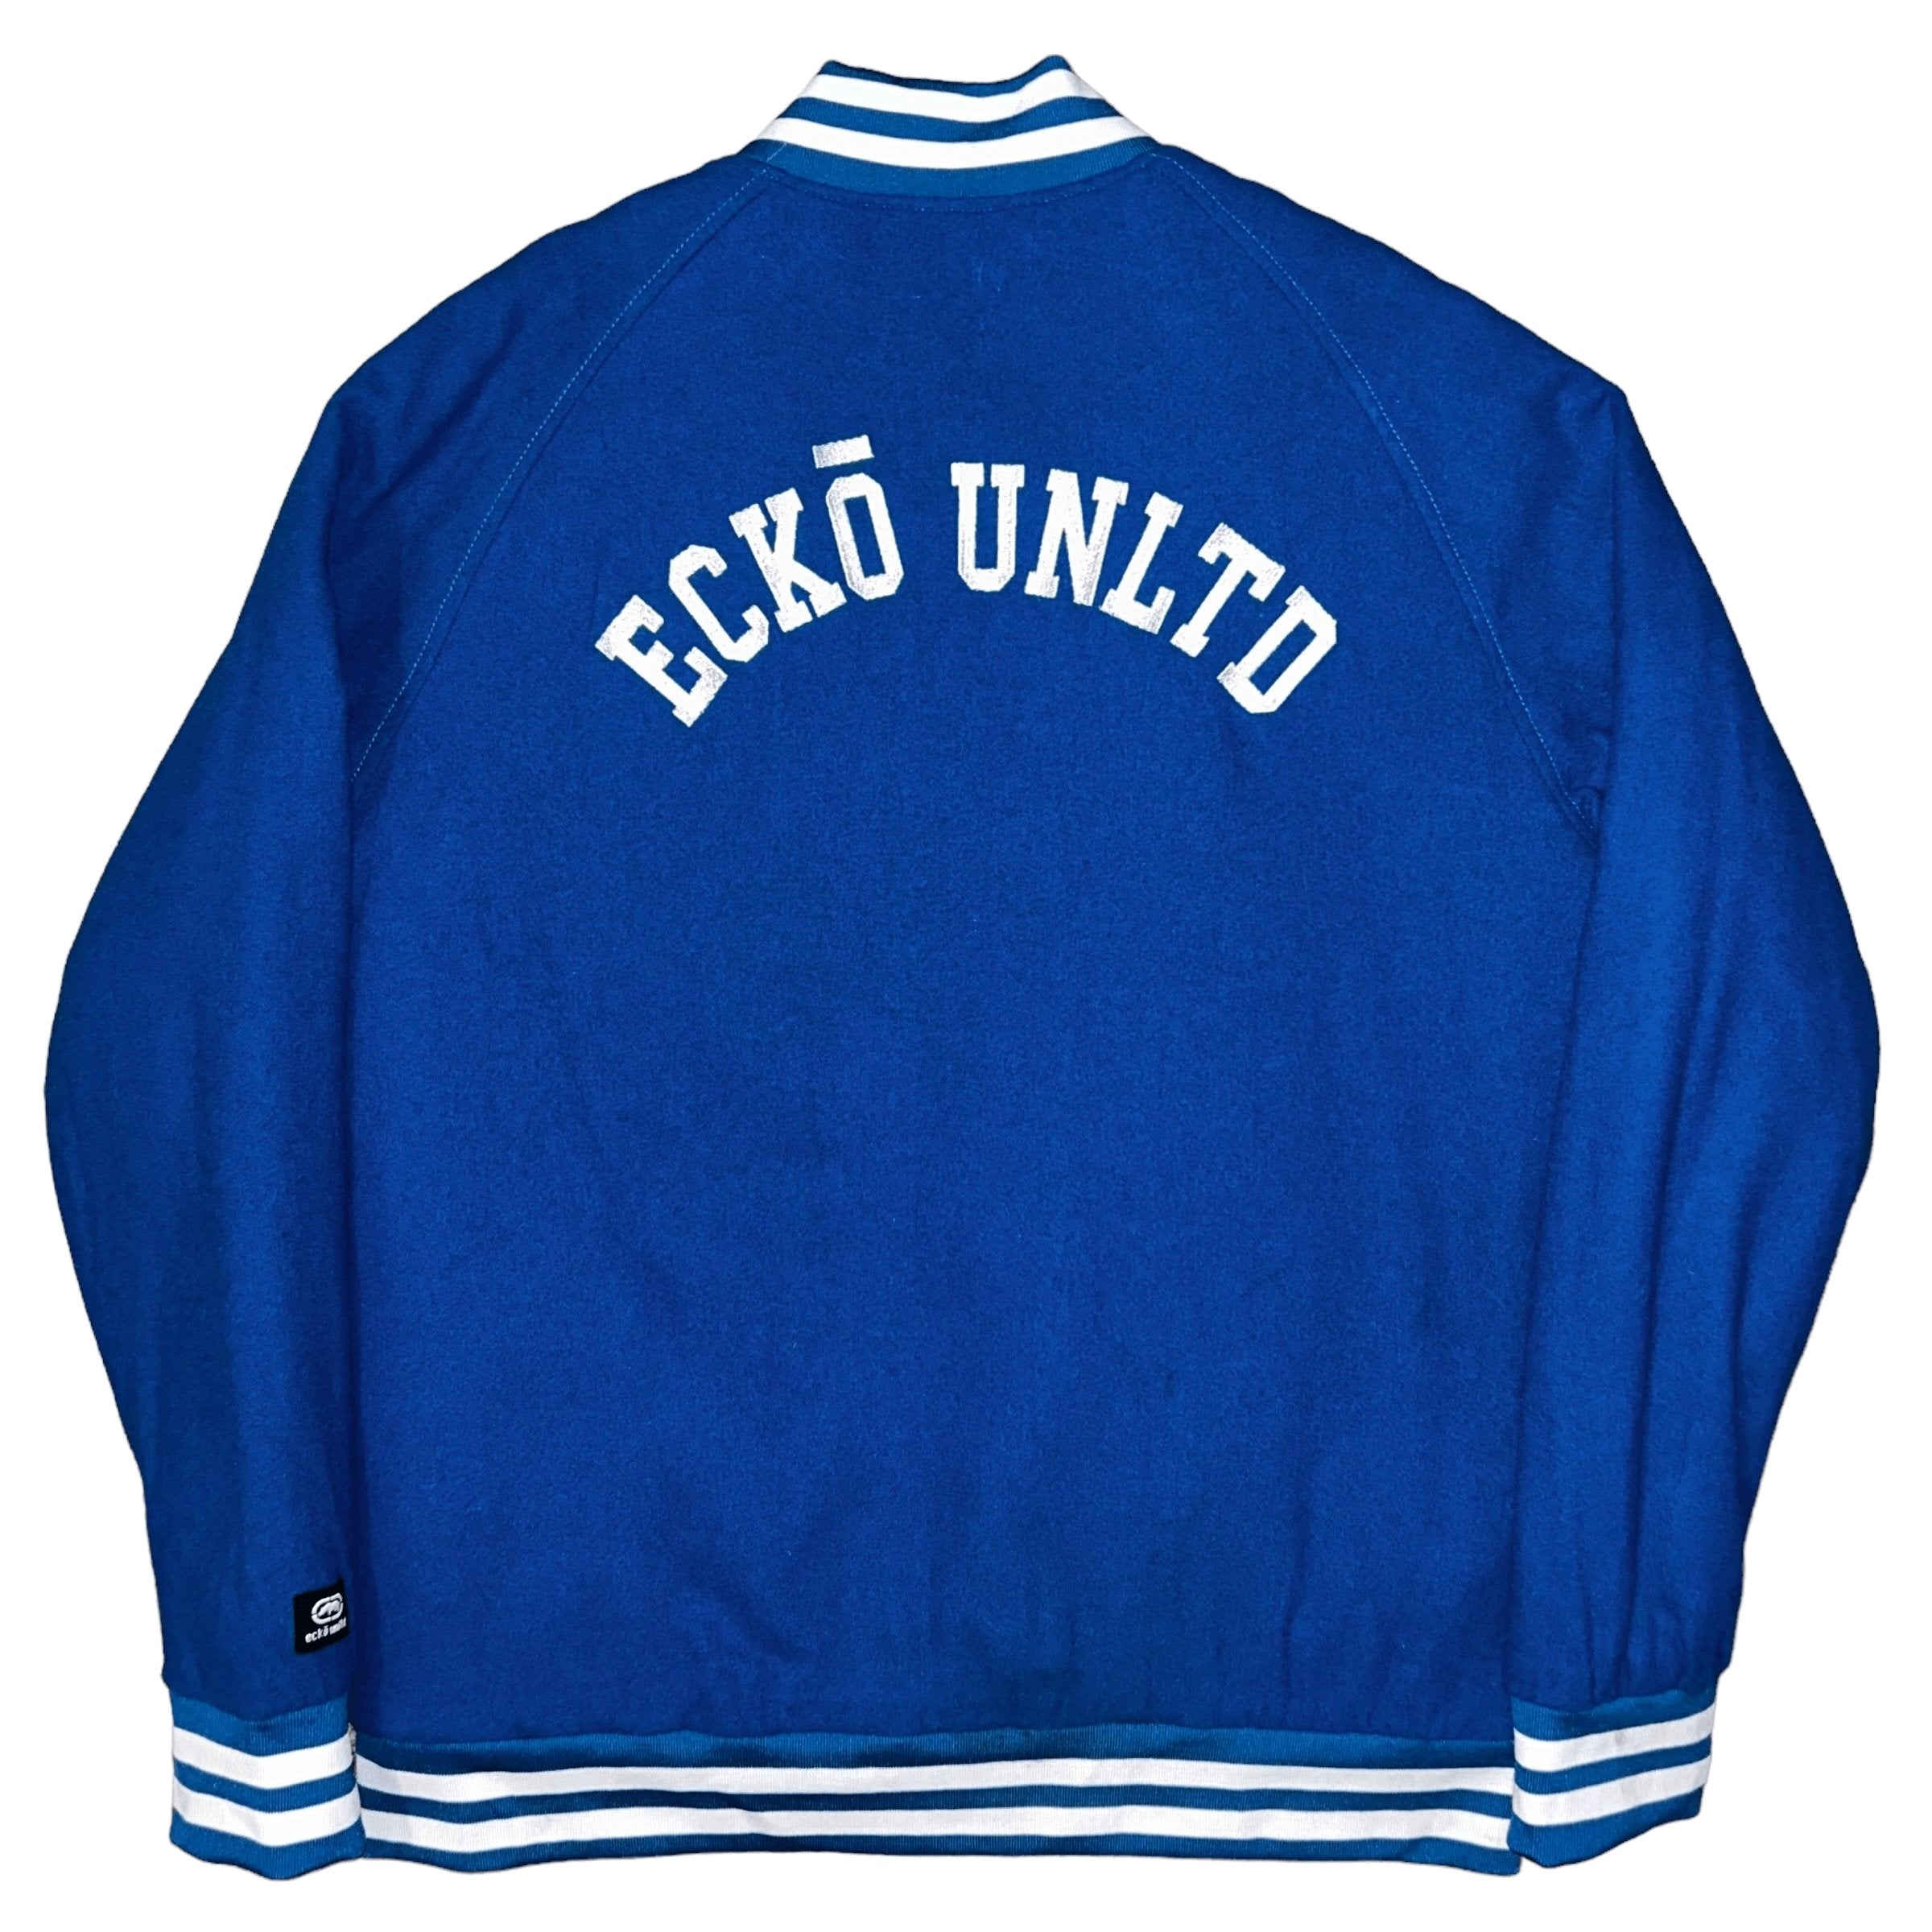 Bomber Ecko Unlimited (M/L) - oldstyleclothing